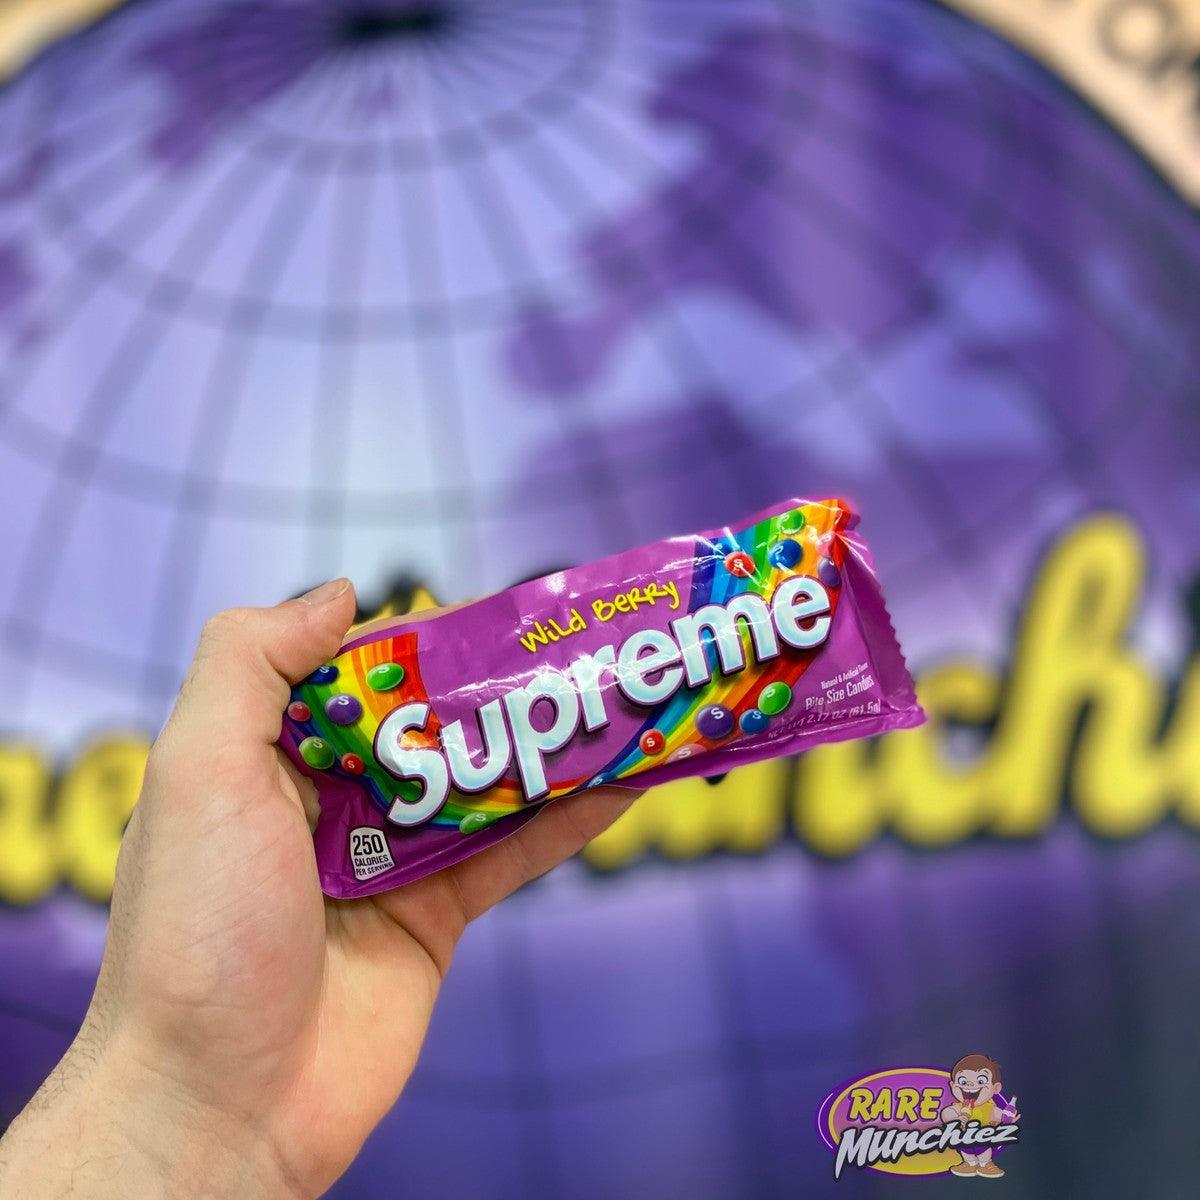 Supreme Skittles and Every Other Crazy Food Collab We Got!